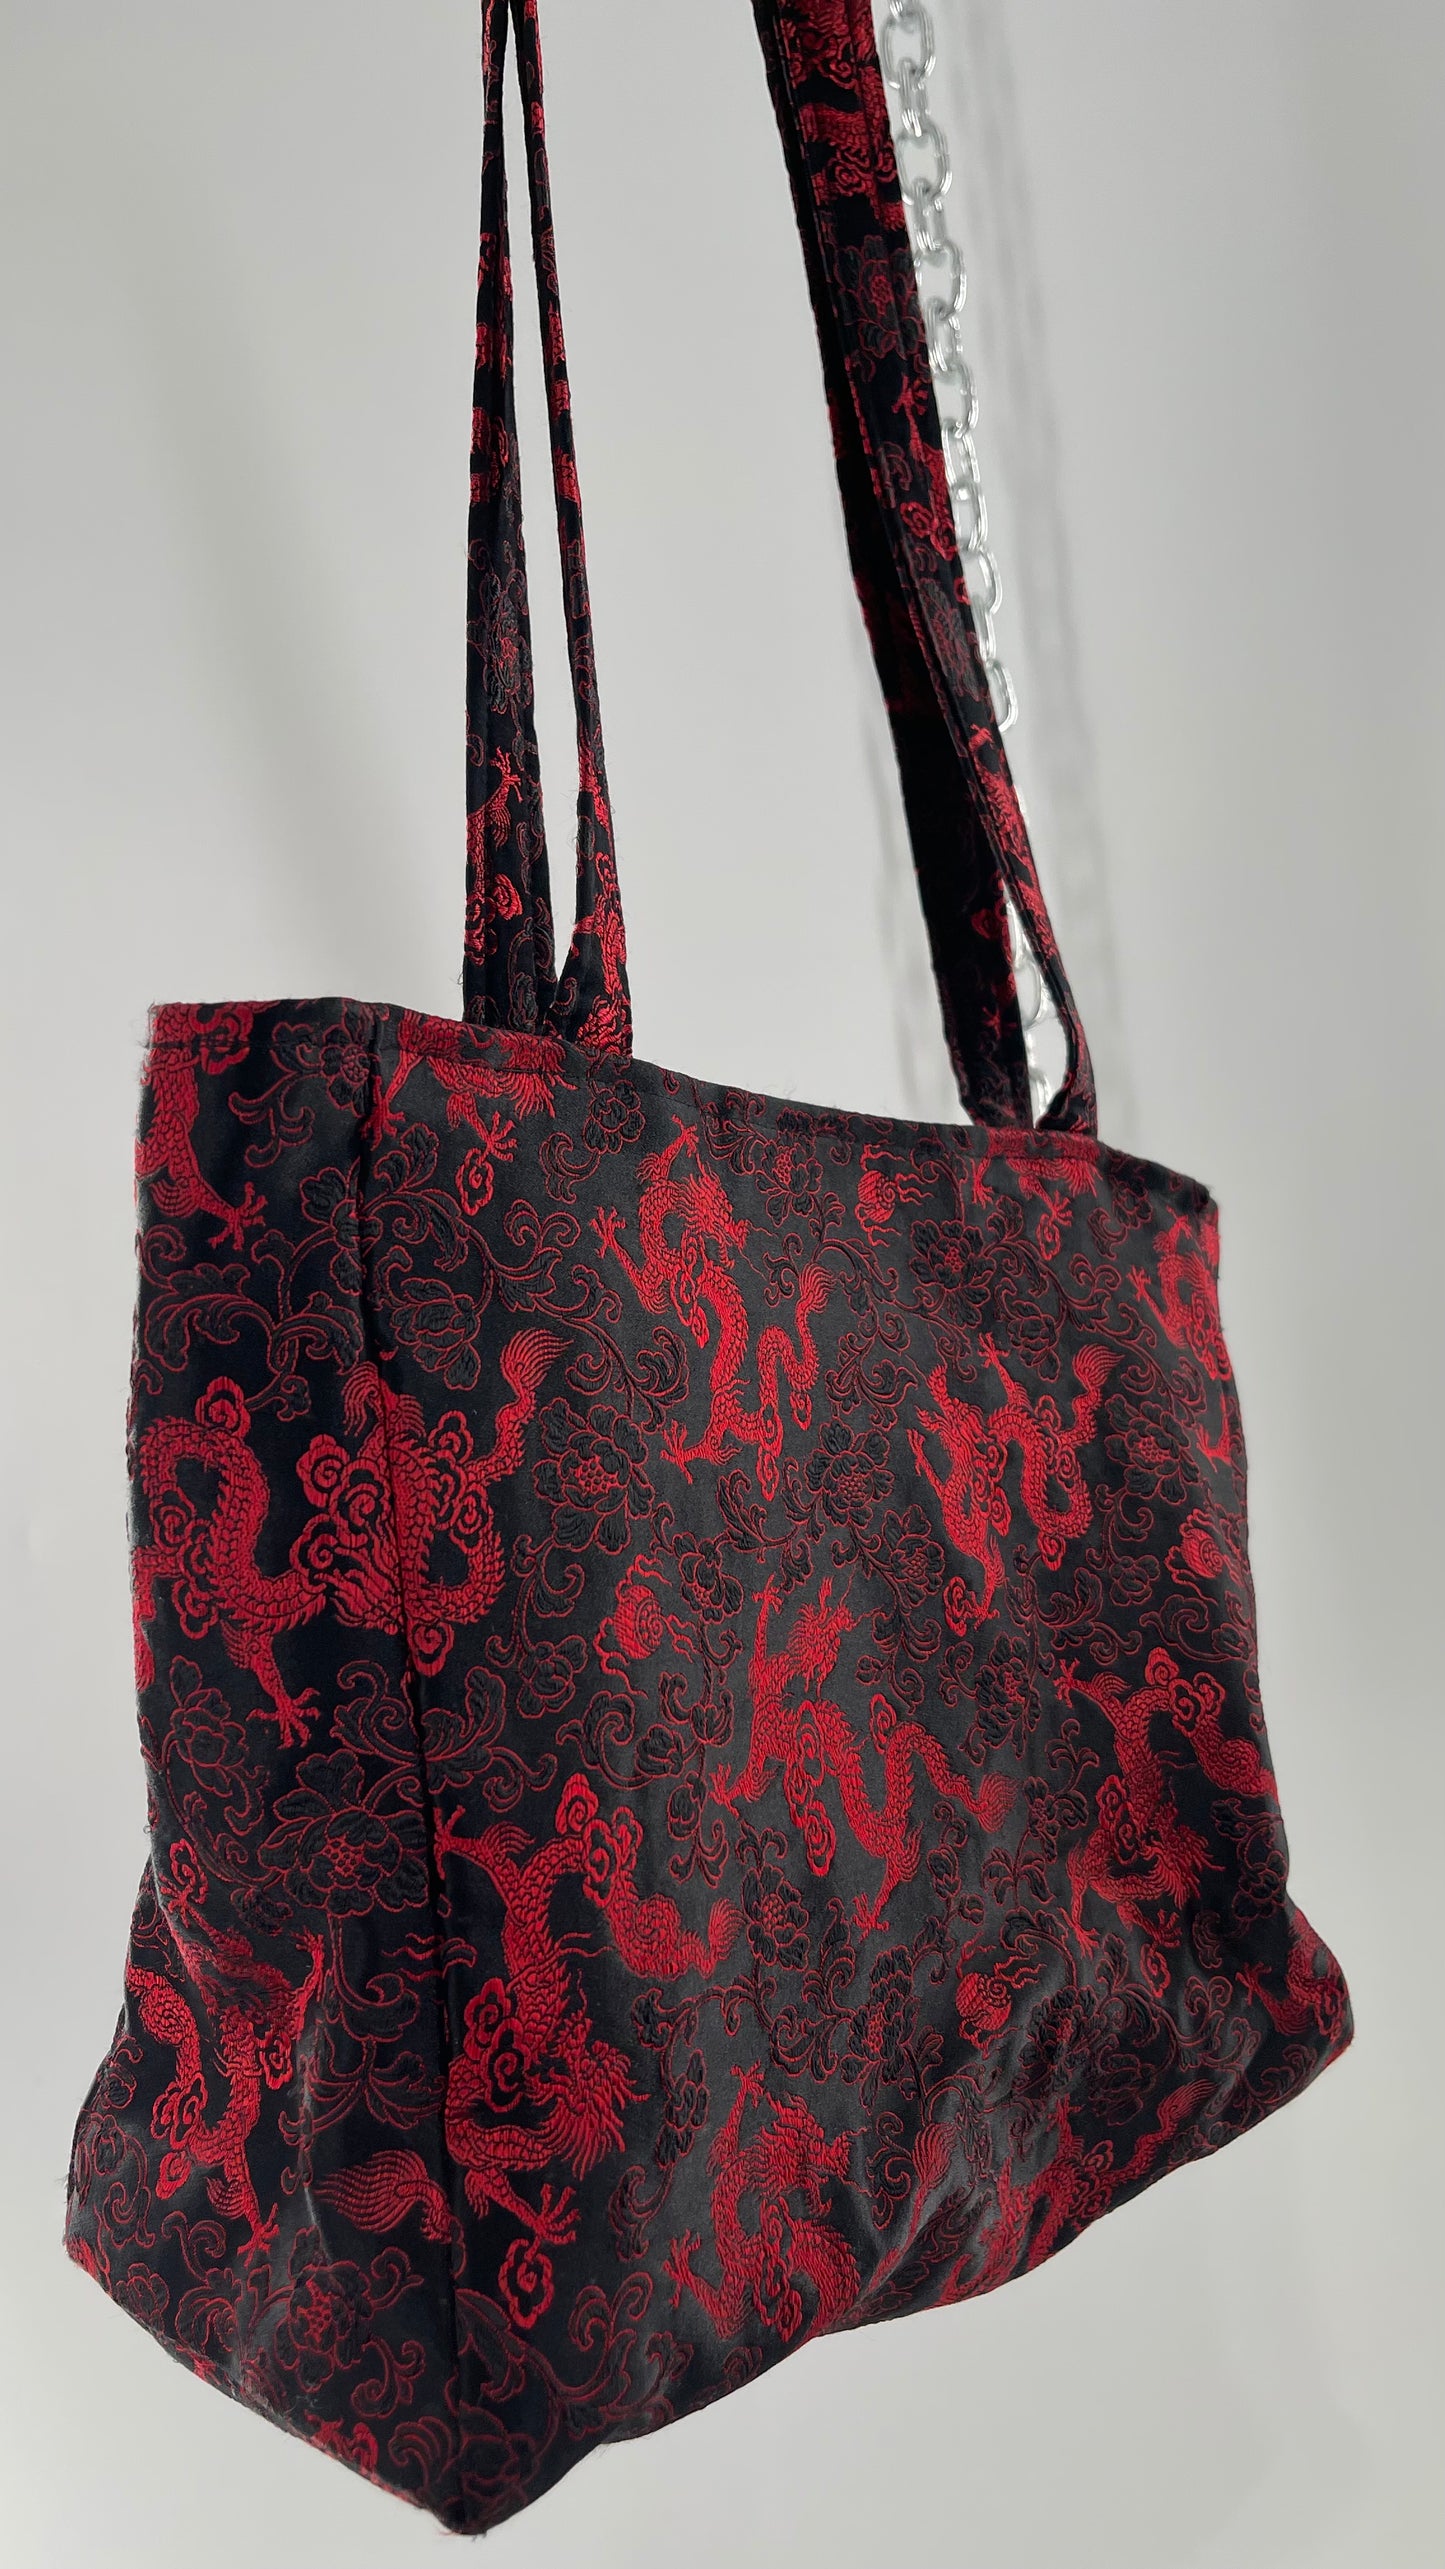 Vintage Black Satin/Silky Tote with Red Dragon/Floral Embroidery